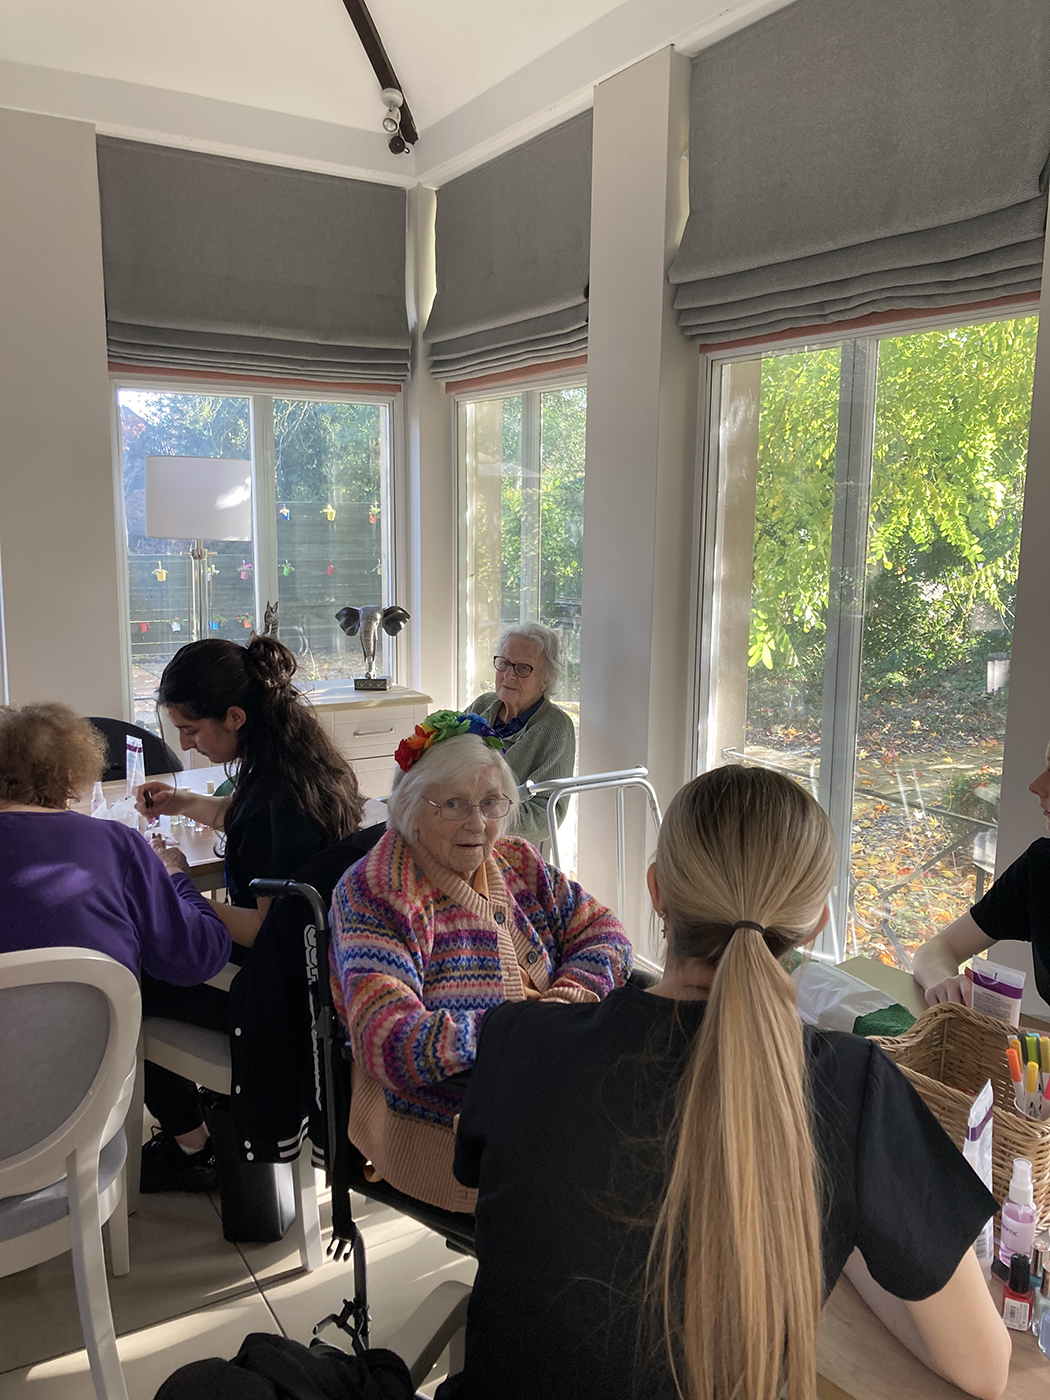 Beauty Therapy students bring the beauty salon to nursing home residents